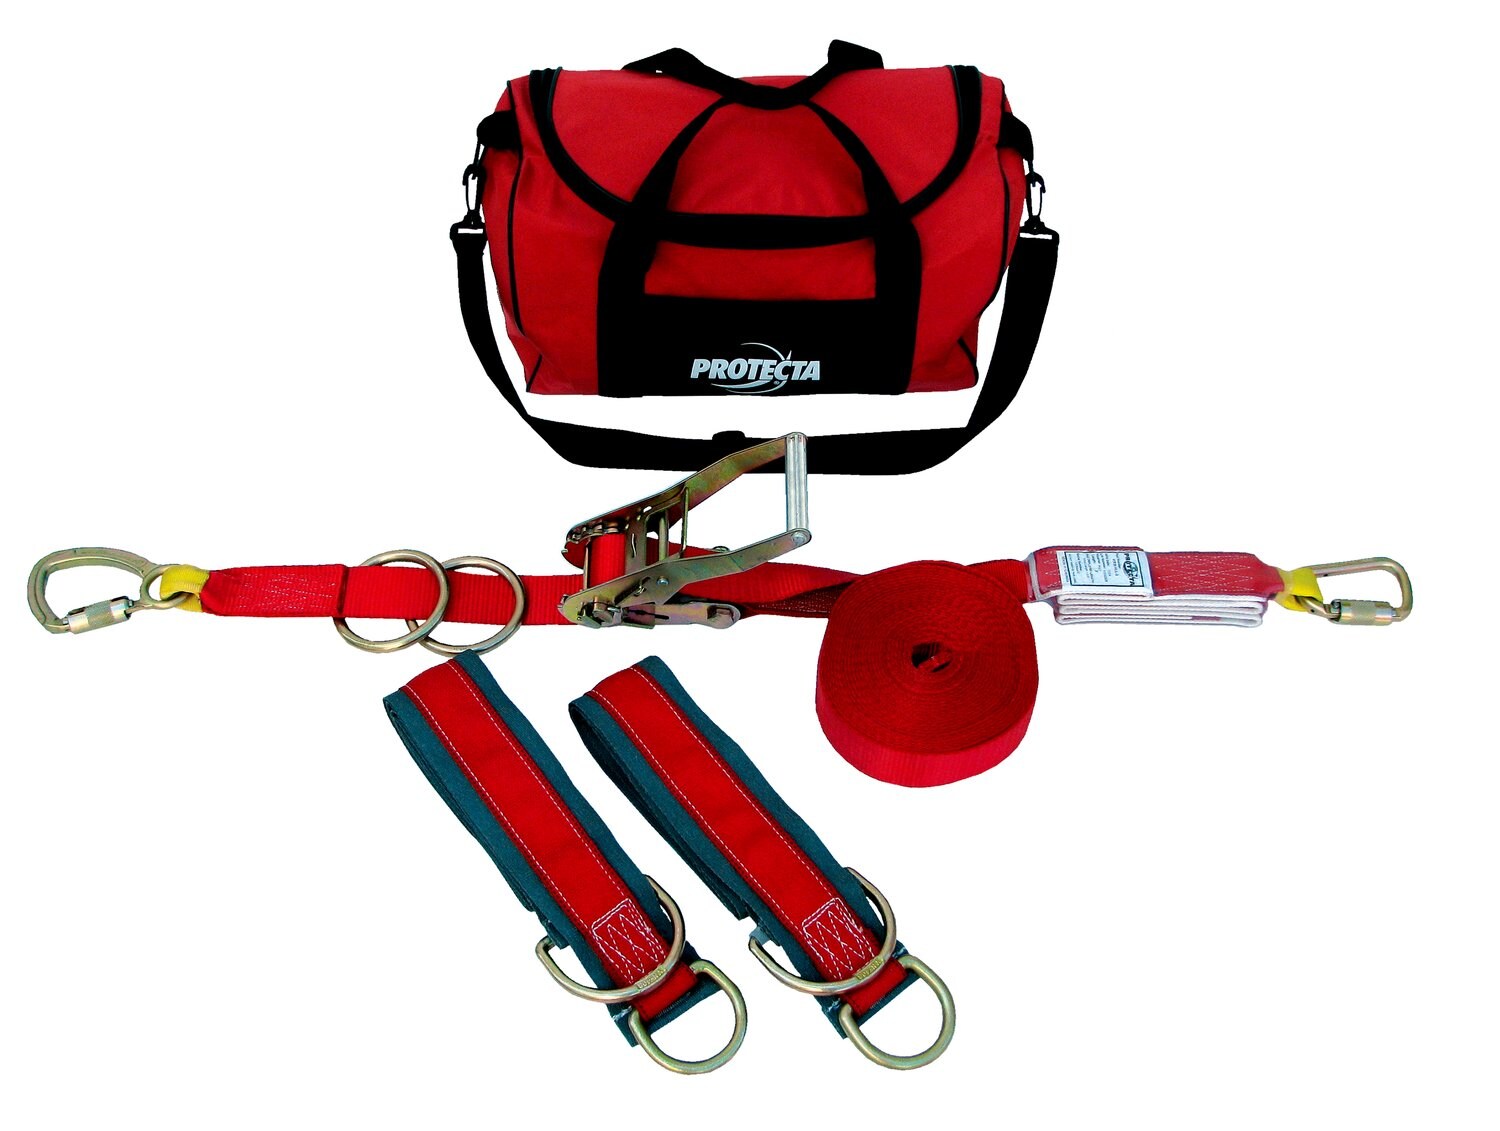 7100232036 - 3M Protecta Temporary Horizontal Lifeline System with Anchors 1200101, Web, 60 ft